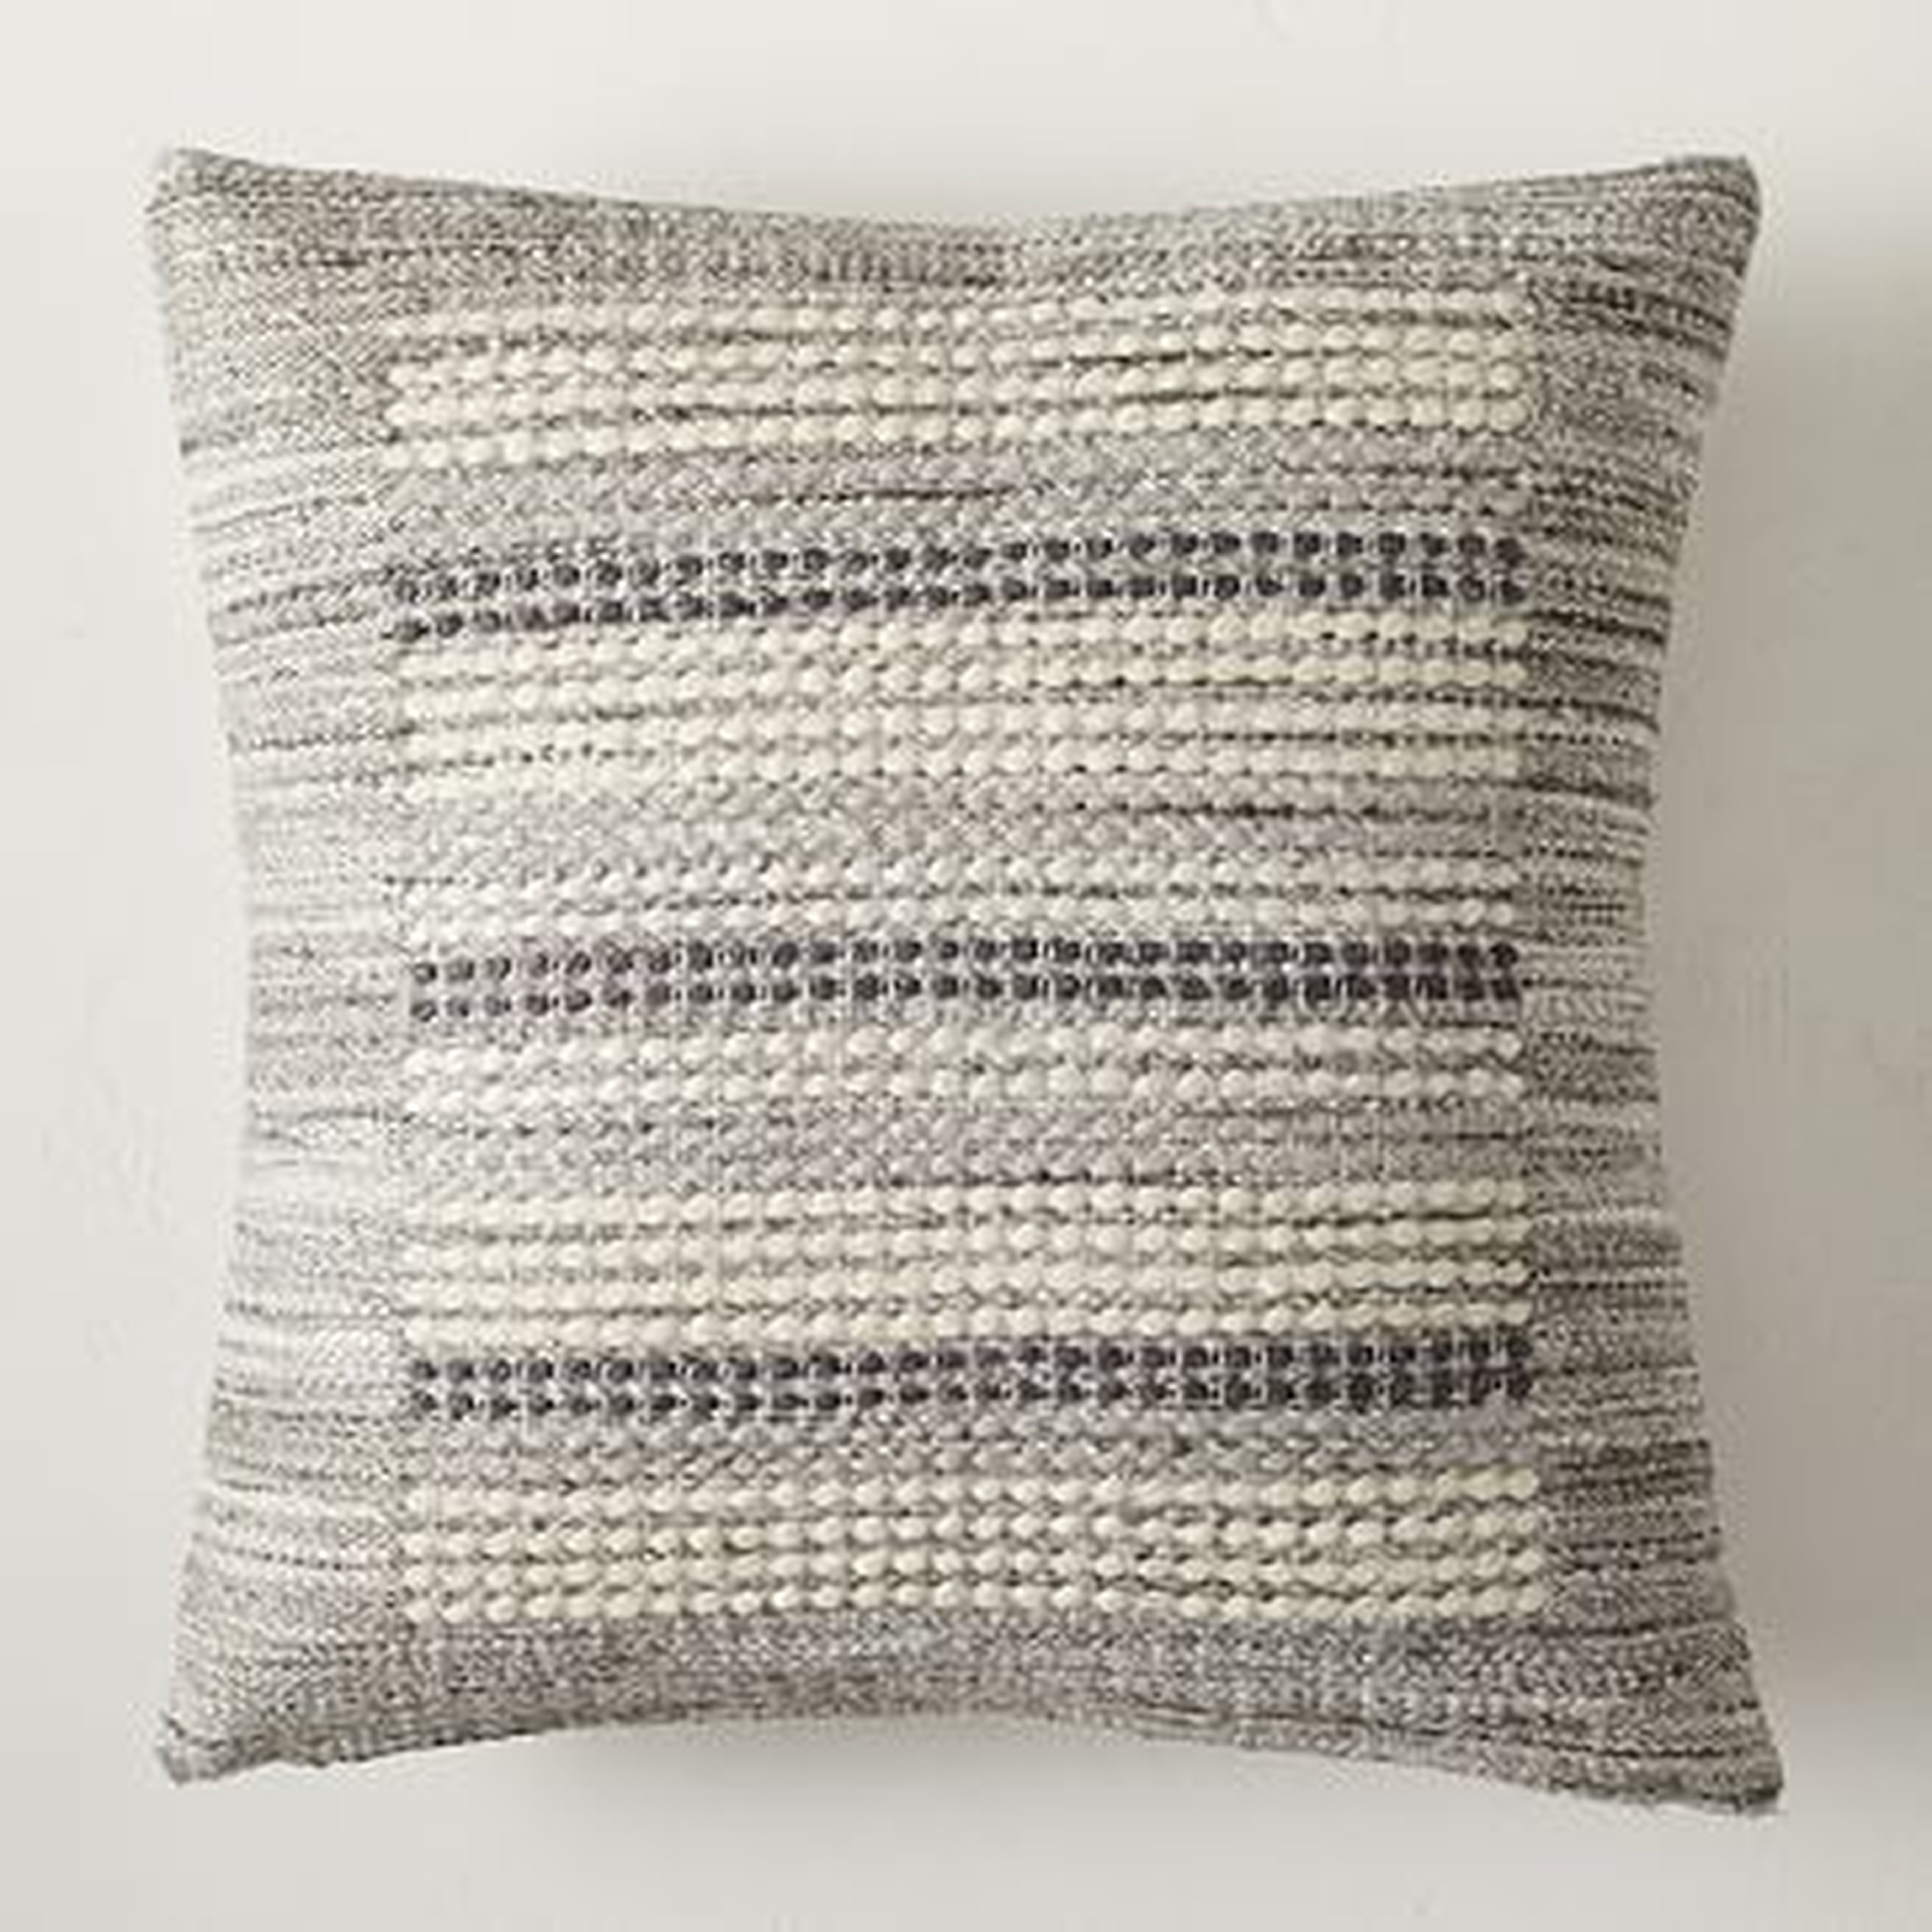 Mixed Stripes Pillow Cover, 20"x20", Charcoal - West Elm